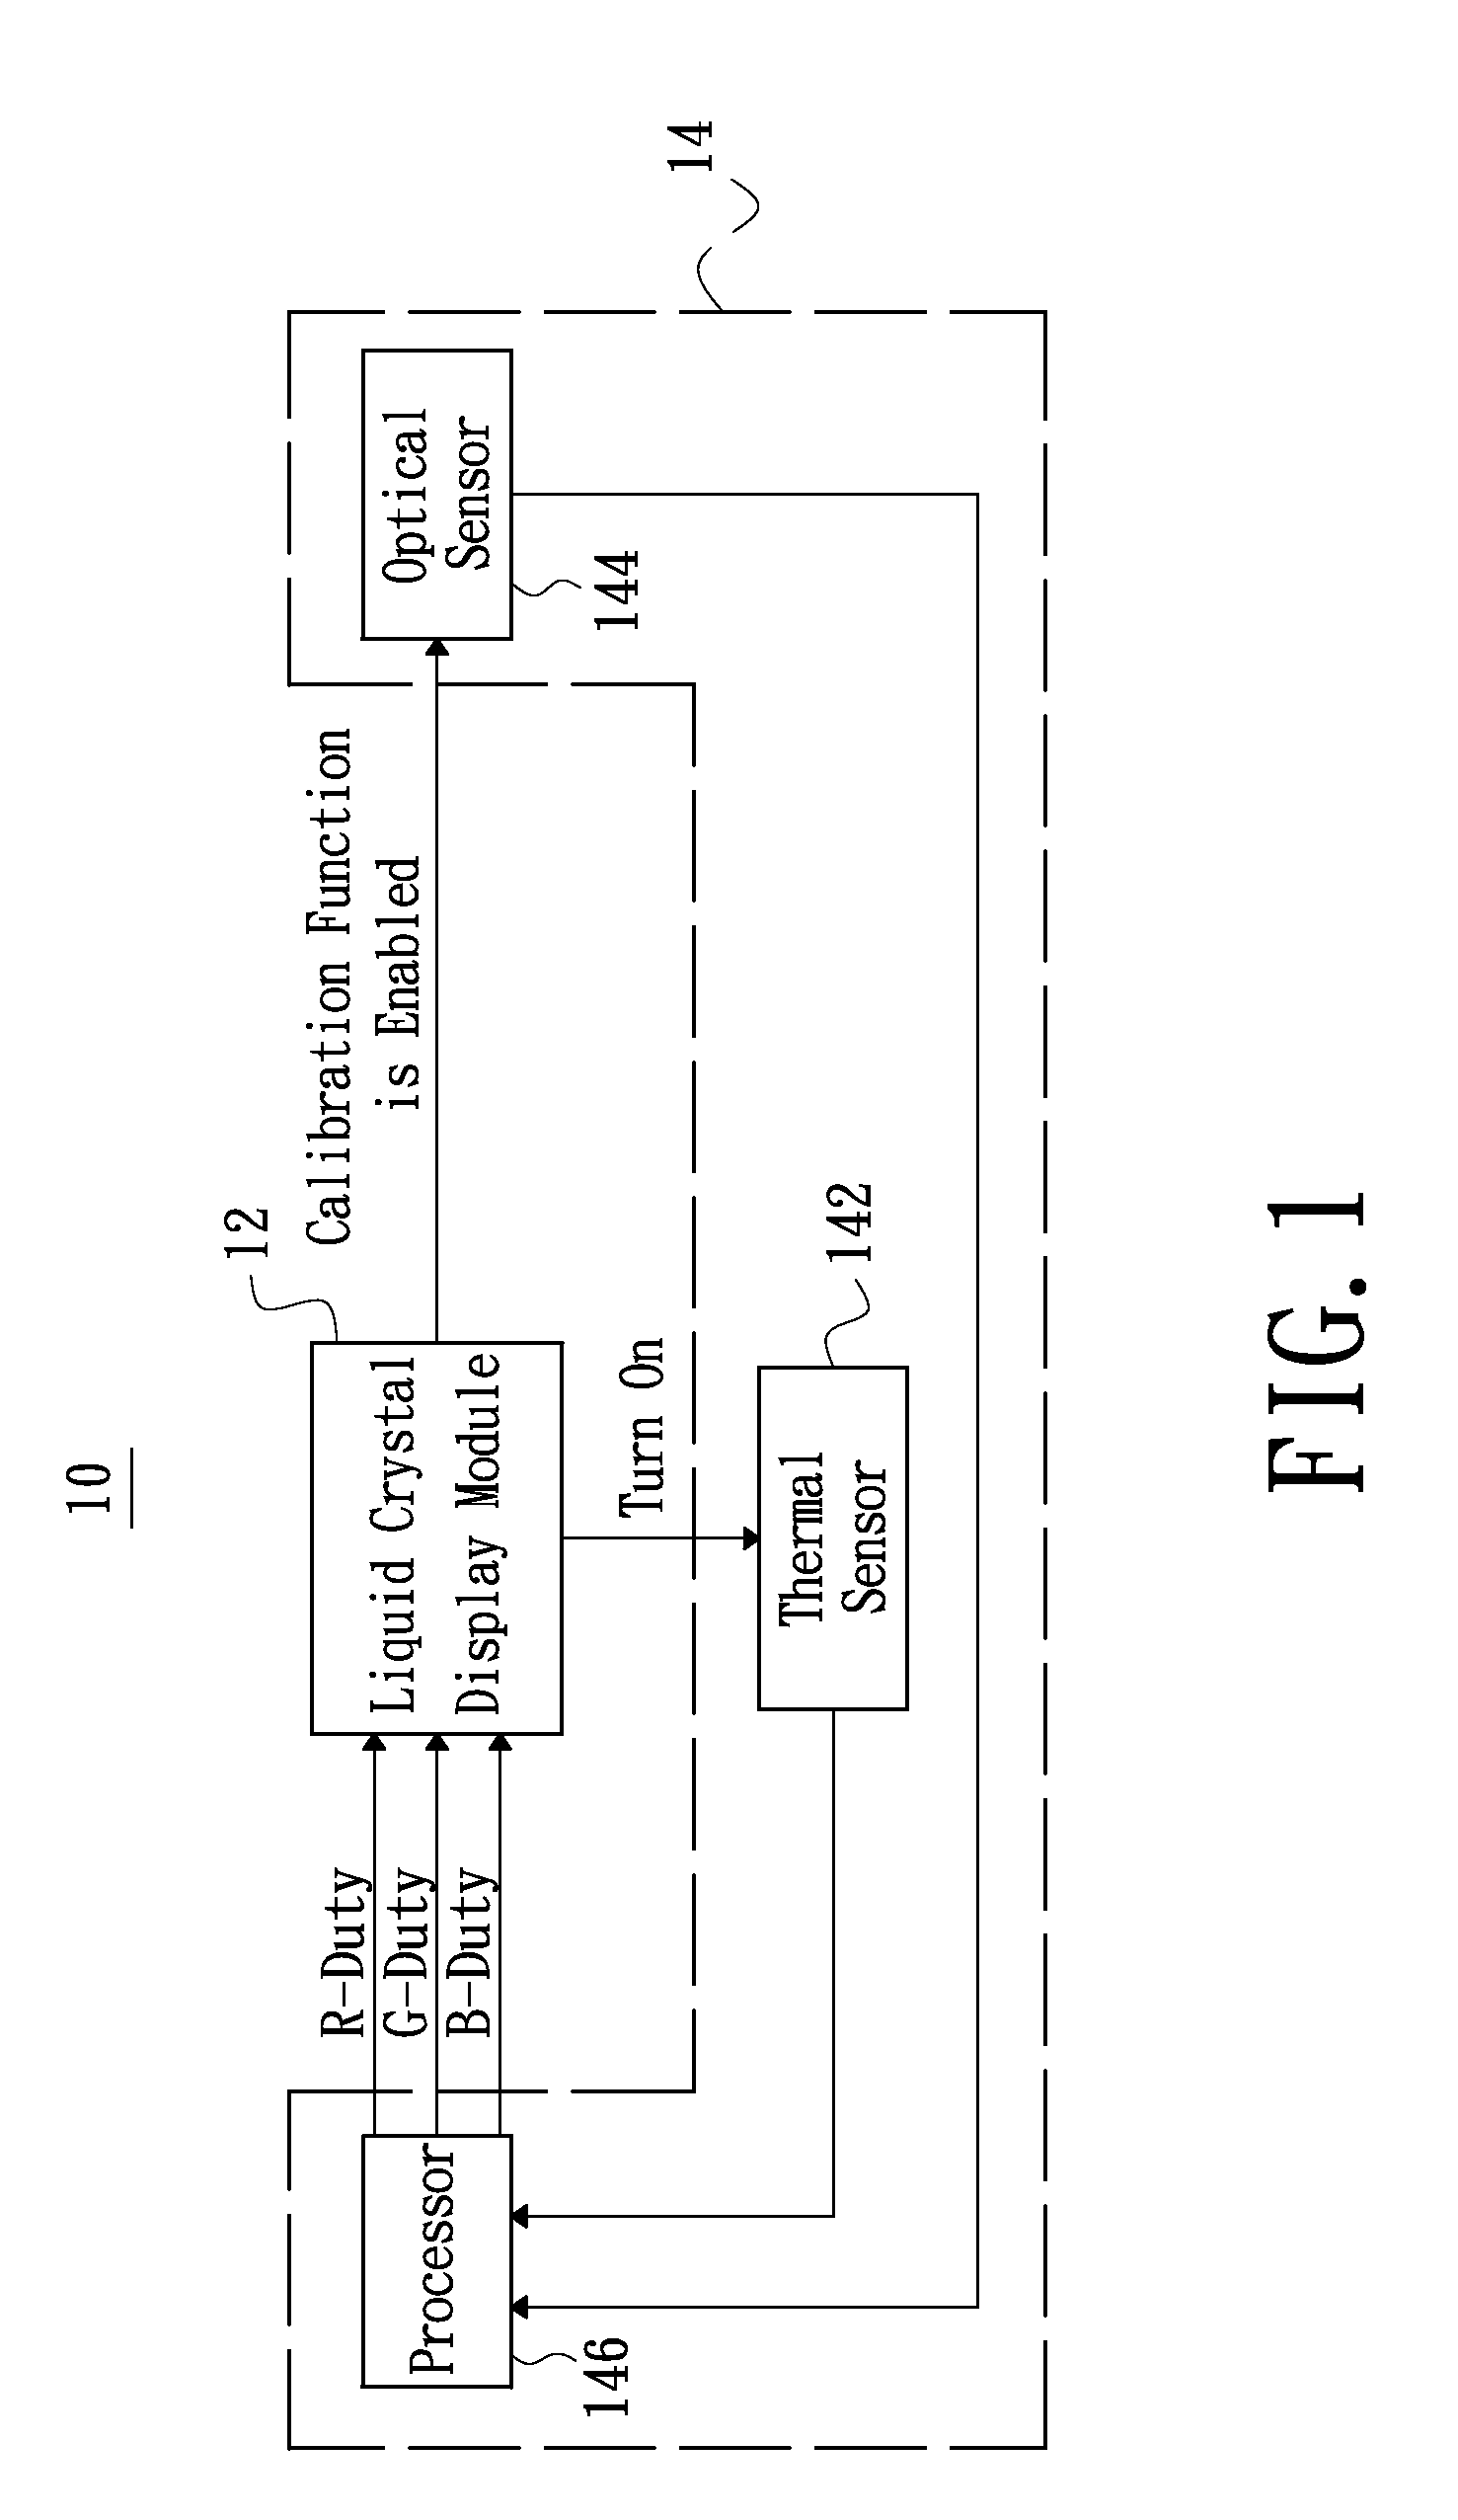 Driving apparatus having an optical sensor and a thermal sensor for thermal and aging compensation of backlight module and driving method of backlight module